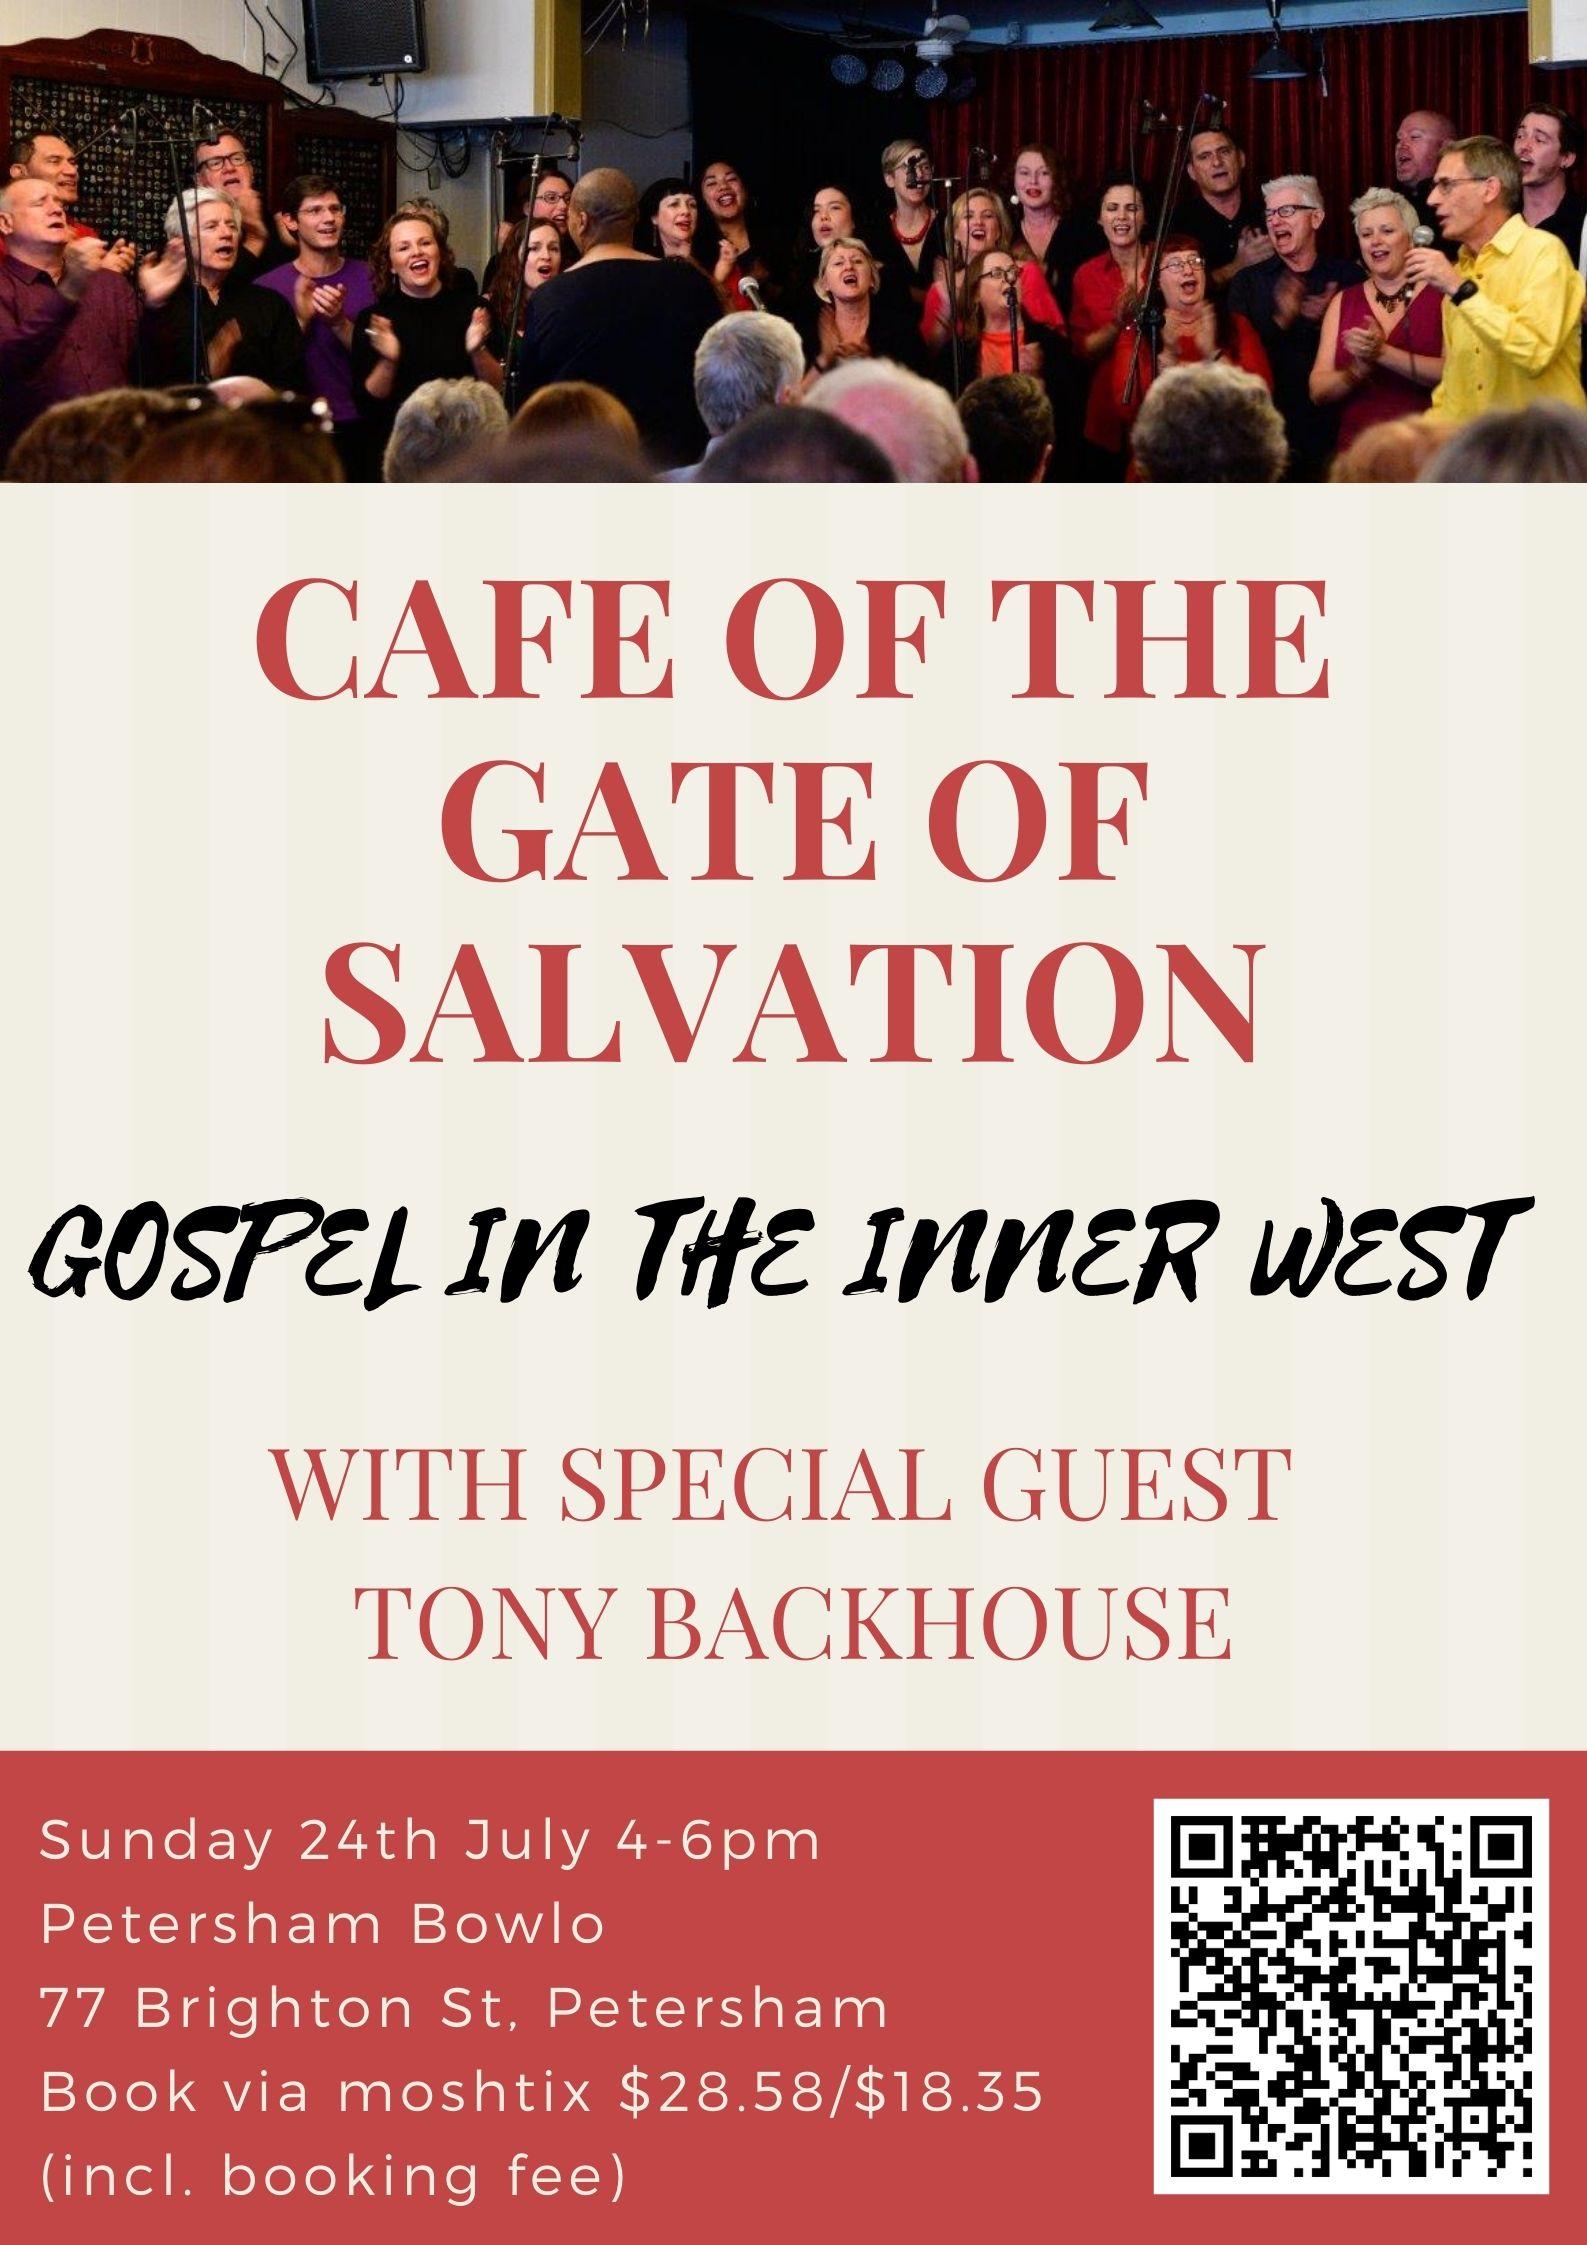 Gospel in the Inner West, with special guest Tony Backhouse